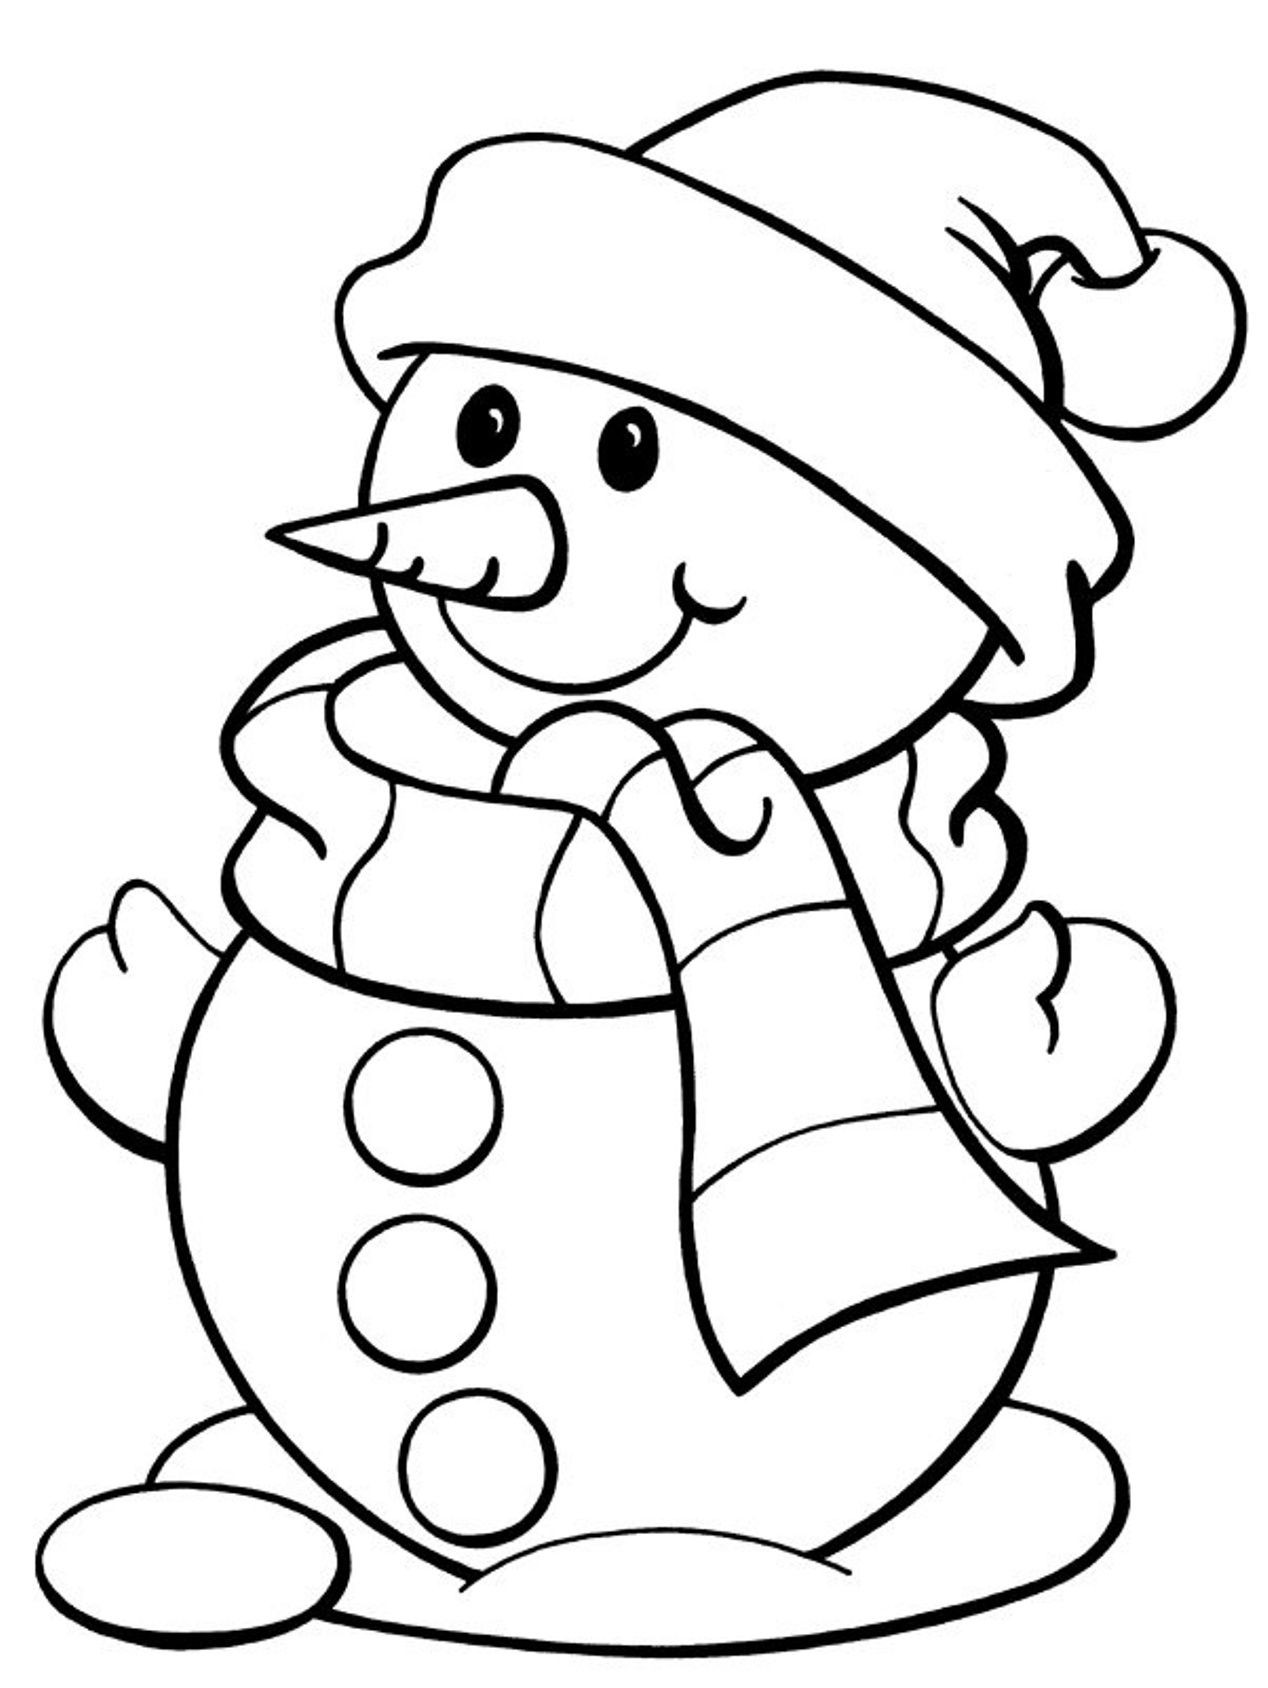 Winter Coloring Pages For Toddlers
 winter coloring pages Google Search